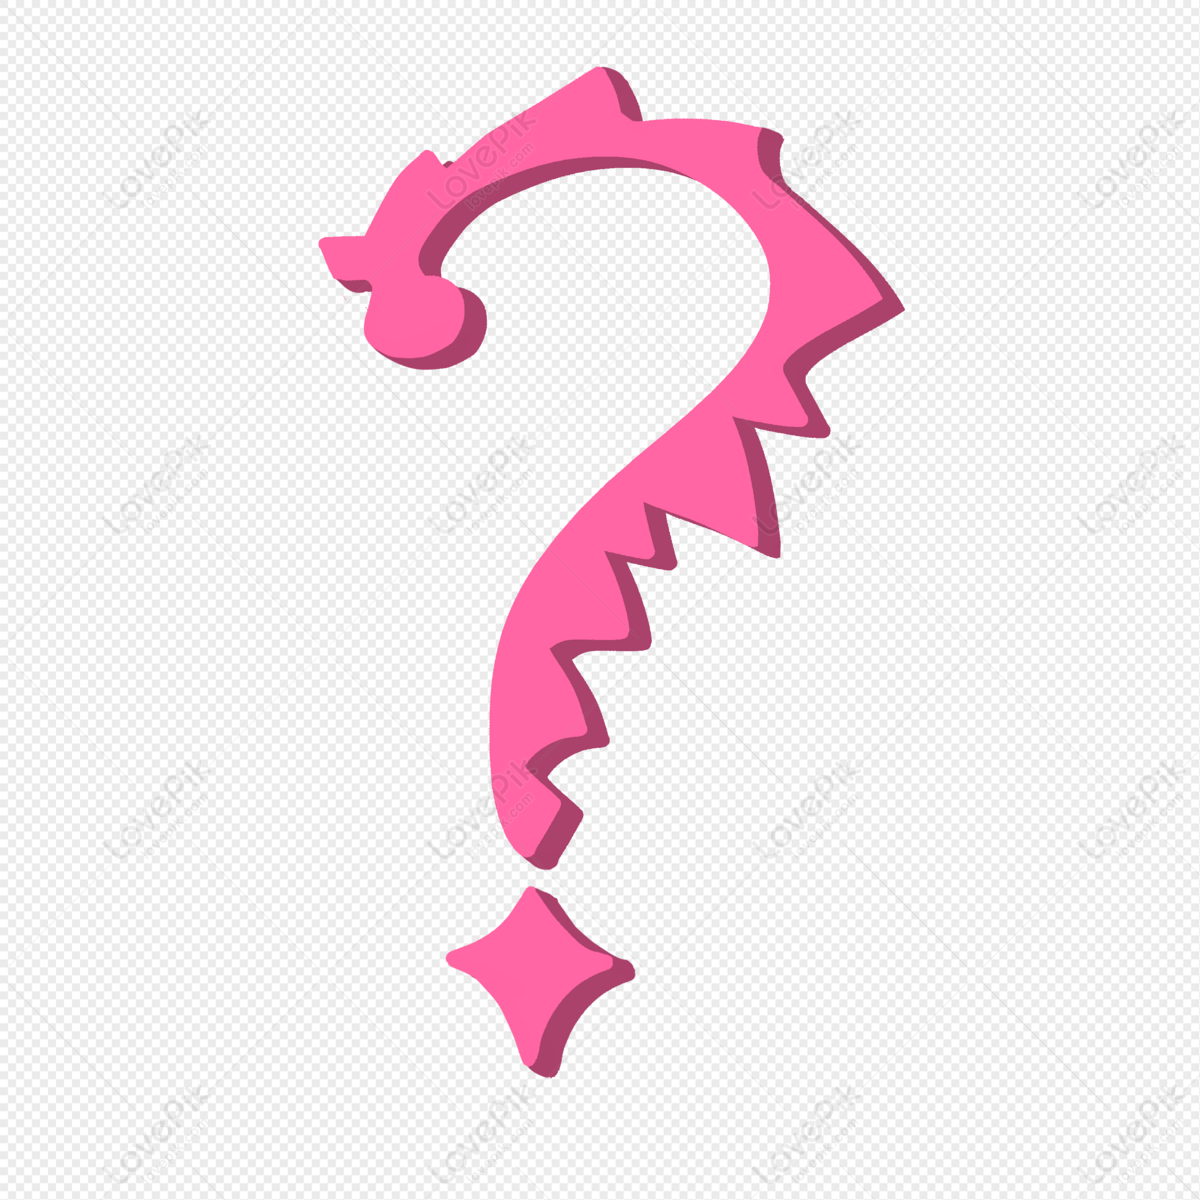 Cartoon Question Mark PNG White Transparent And Clipart Image For Free  Download - Lovepik | 401235122